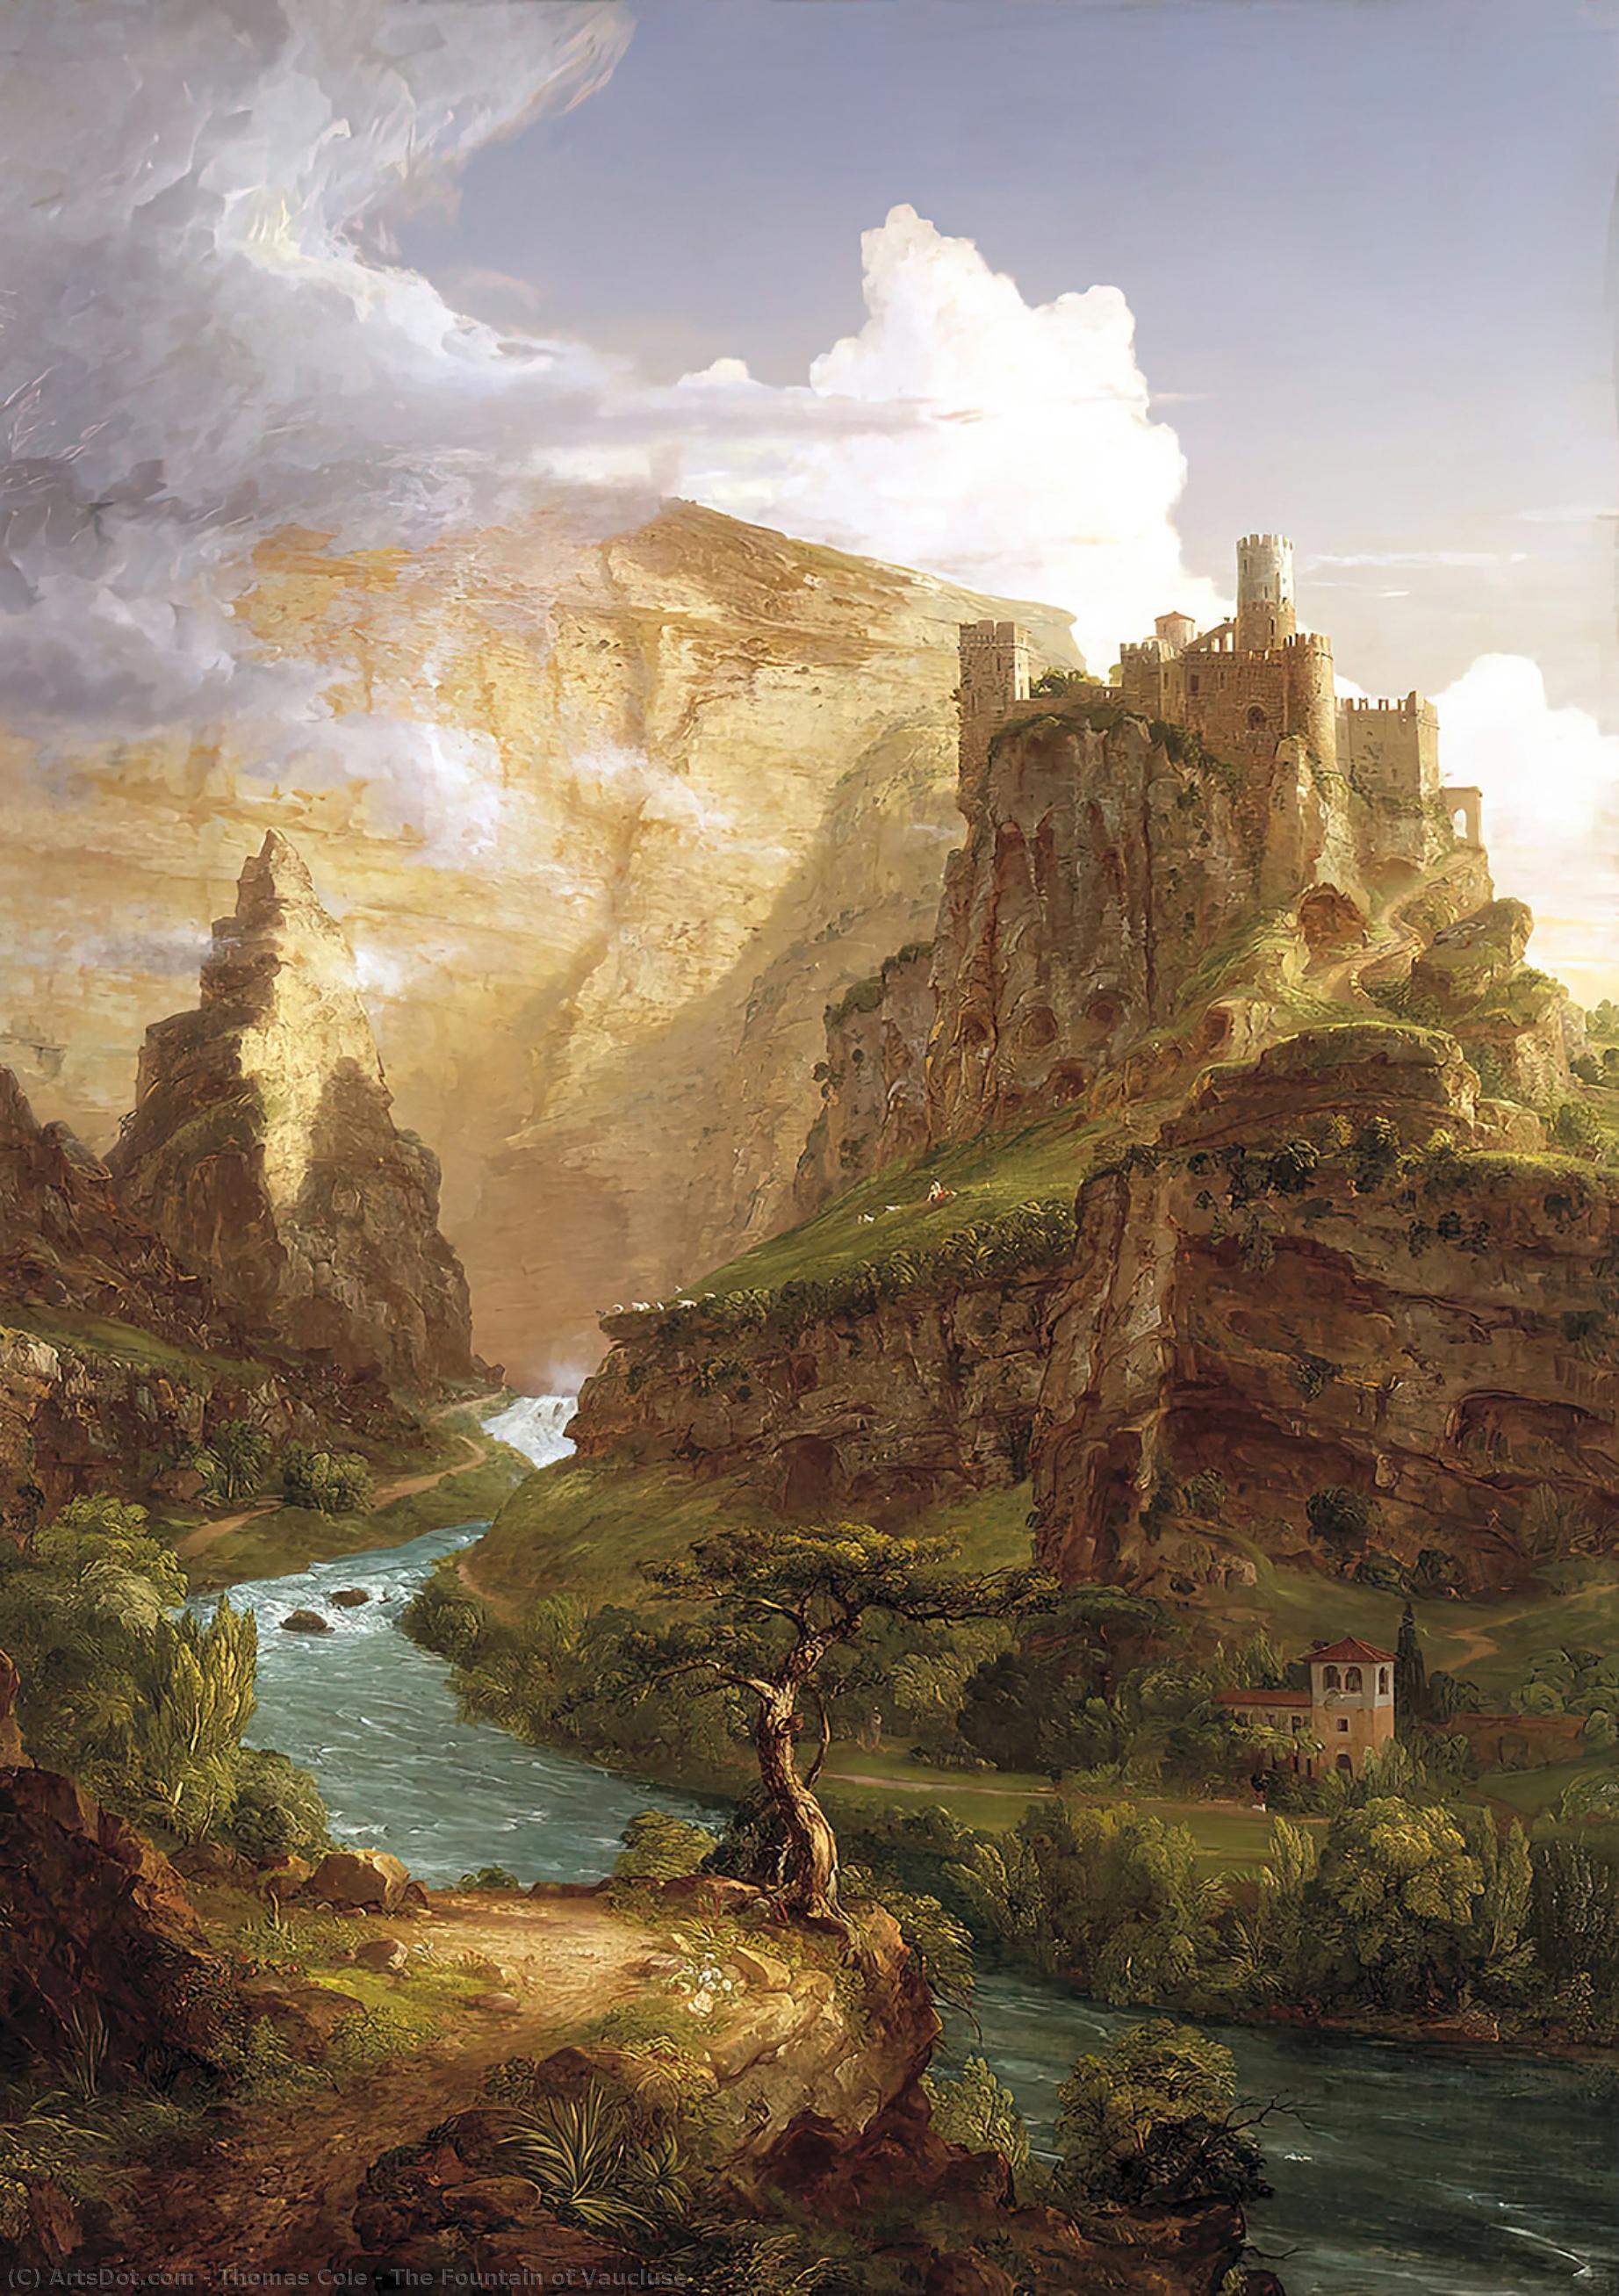 WikiOO.org - 백과 사전 - 회화, 삽화 Thomas Cole - The Fountain of Vaucluse